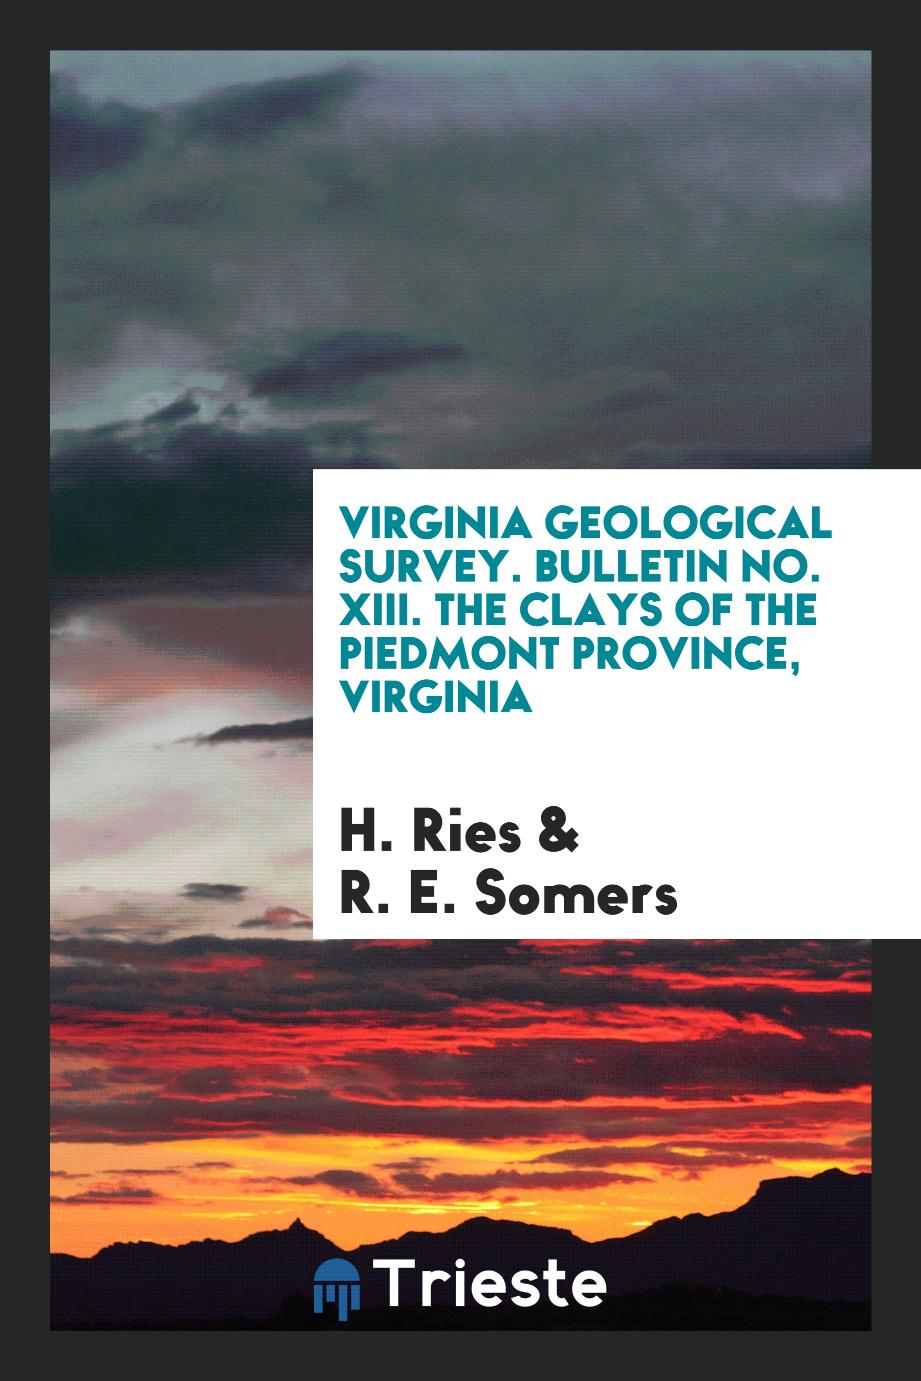 Virginia Geological Survey. Bulletin No. XIII. The Clays of the Piedmont Province, Virginia